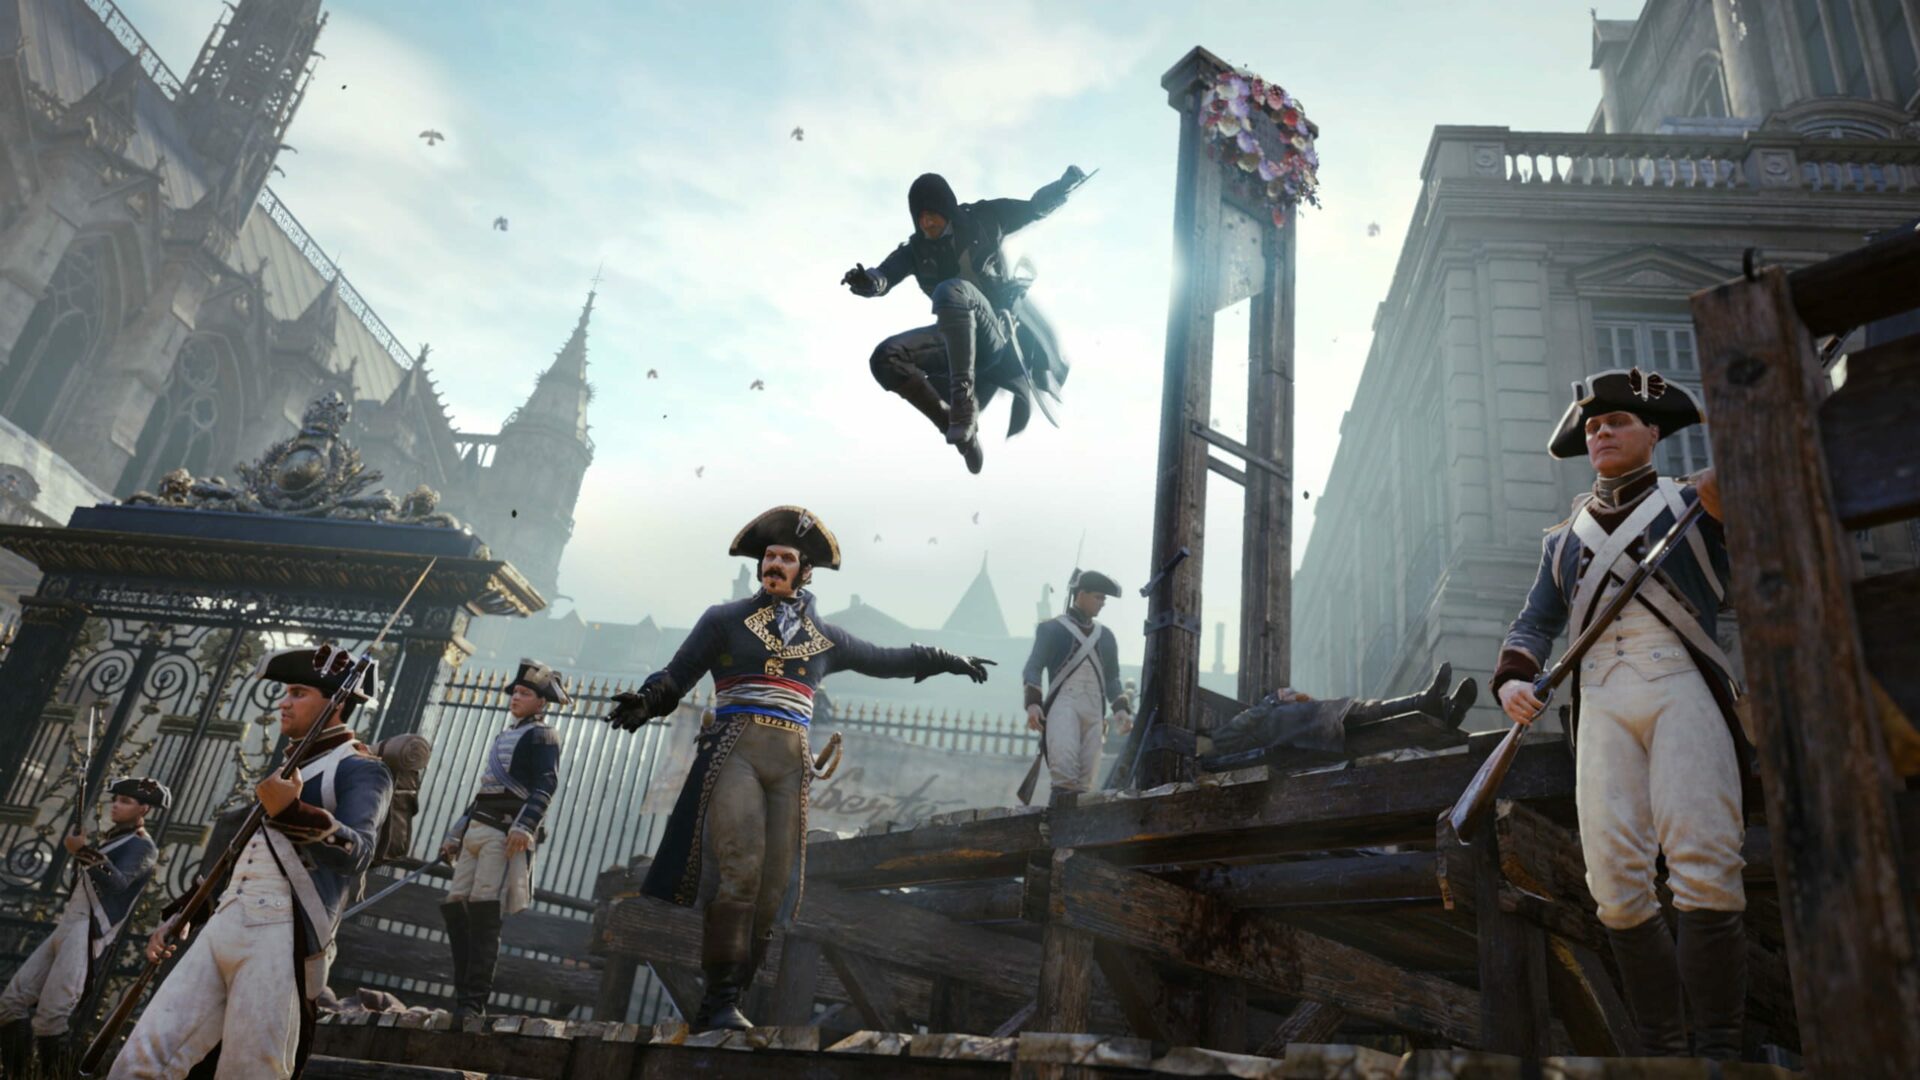 Assassin's Creed Unity Digital Download Code for Xbox One Only $3.03  (Regularly $58.05)